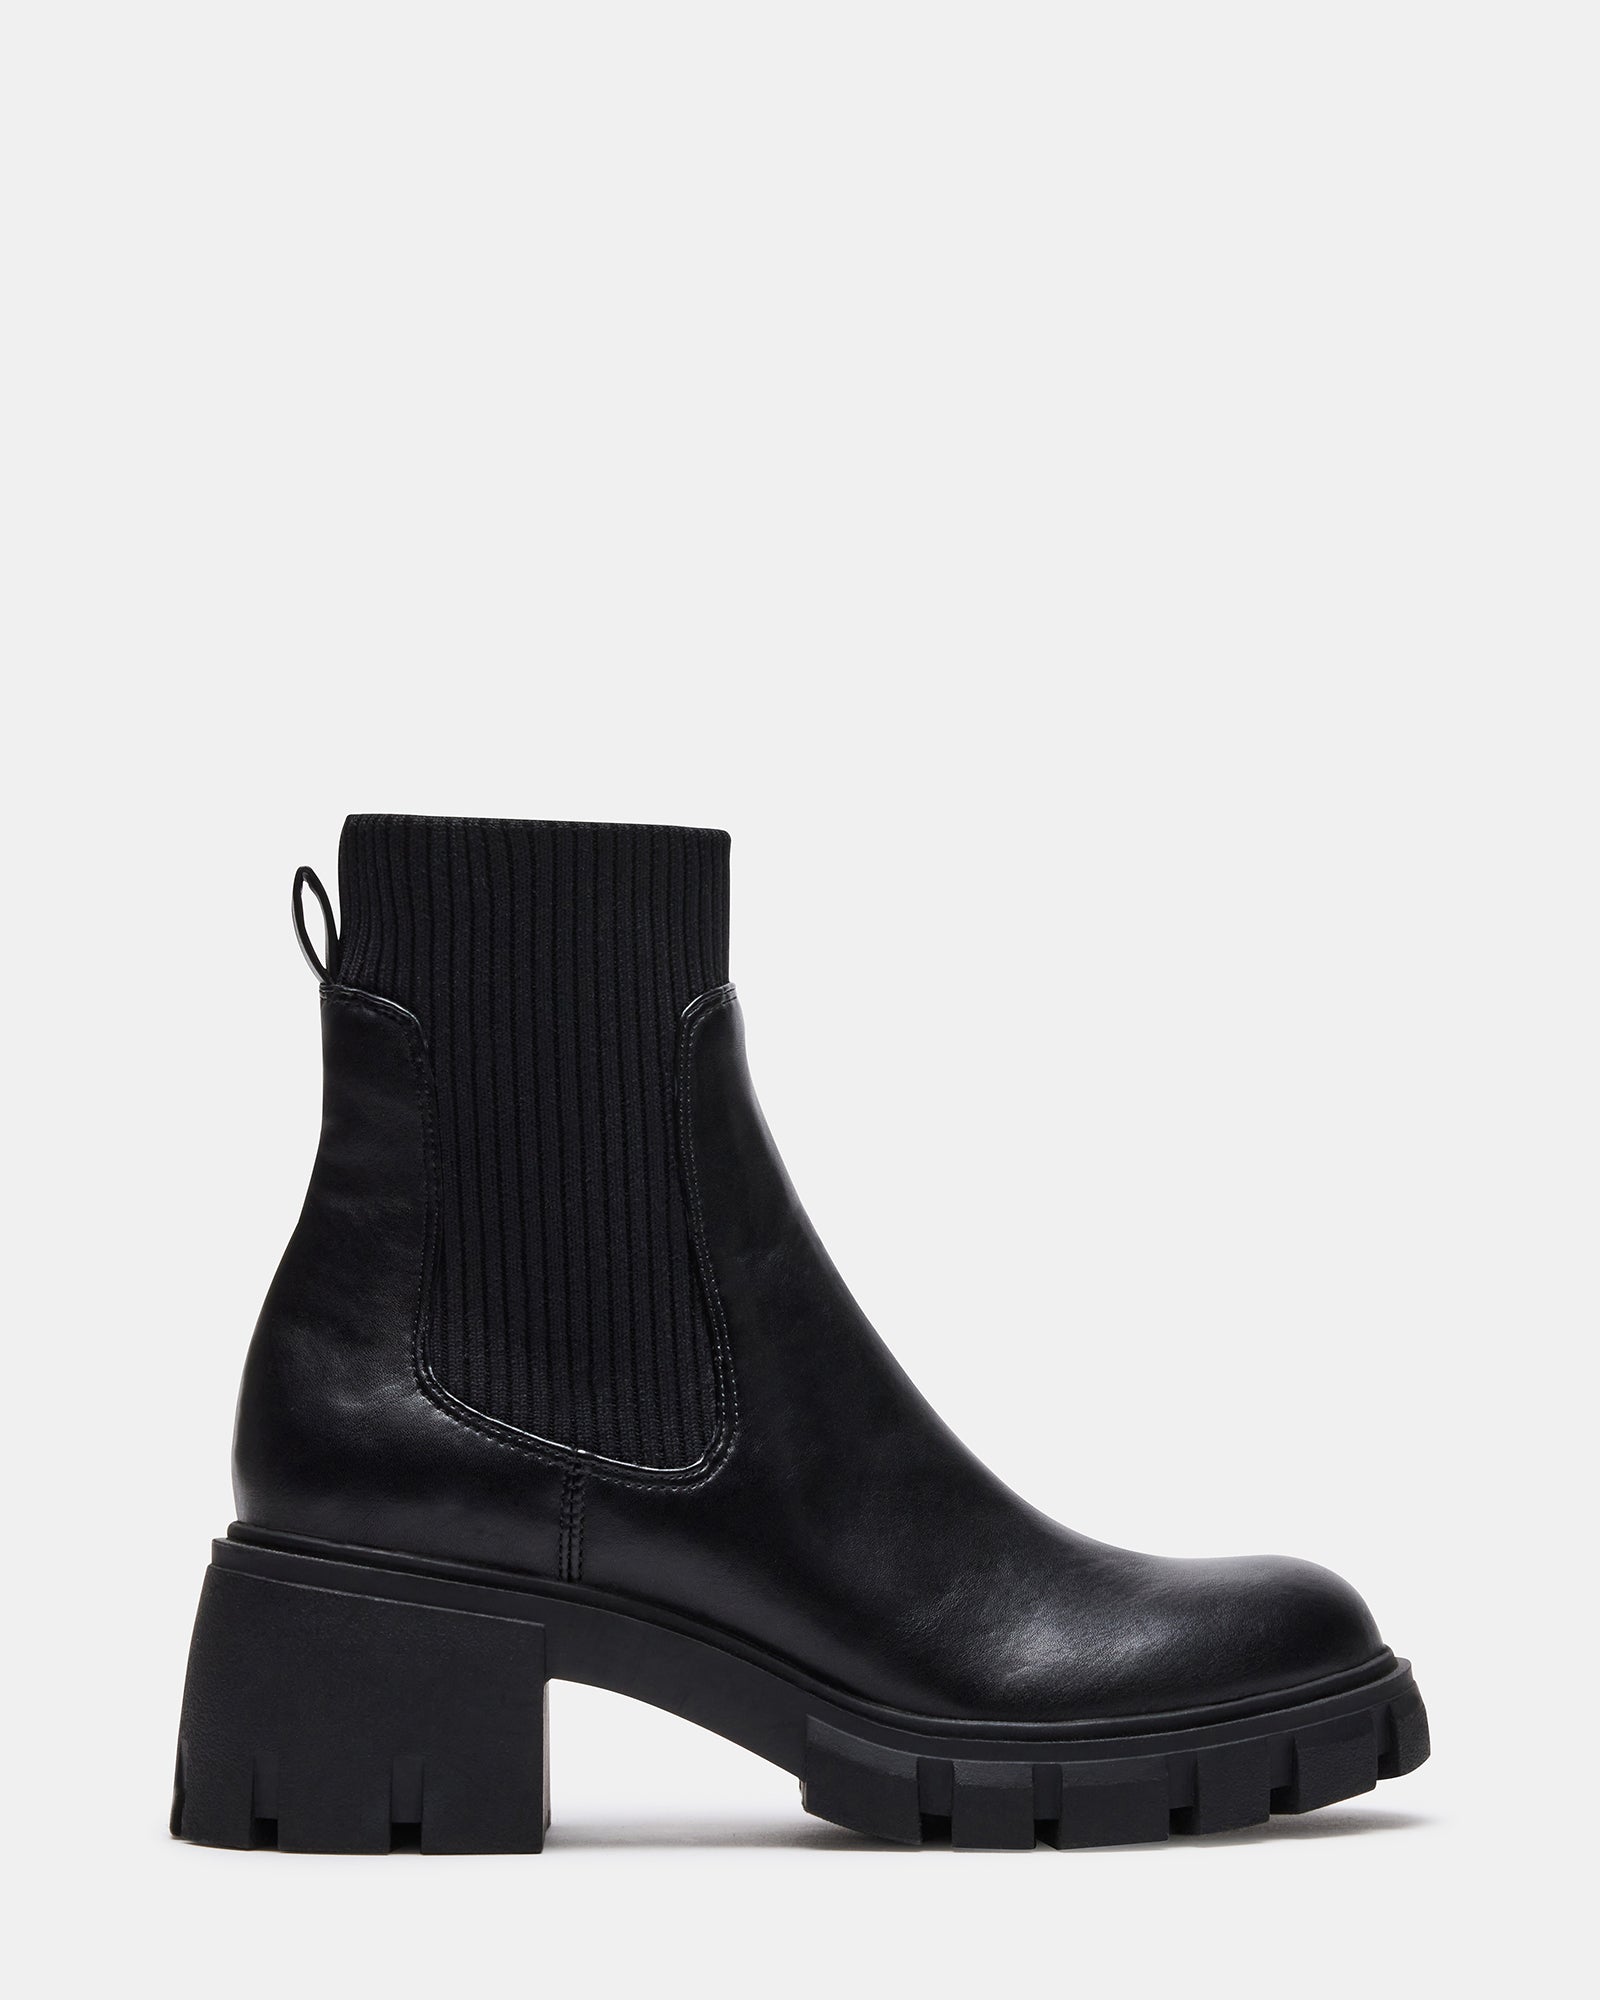 HUTCH Black Boots for Women | Stacked Block Heel & Lug Sole Steve Madden